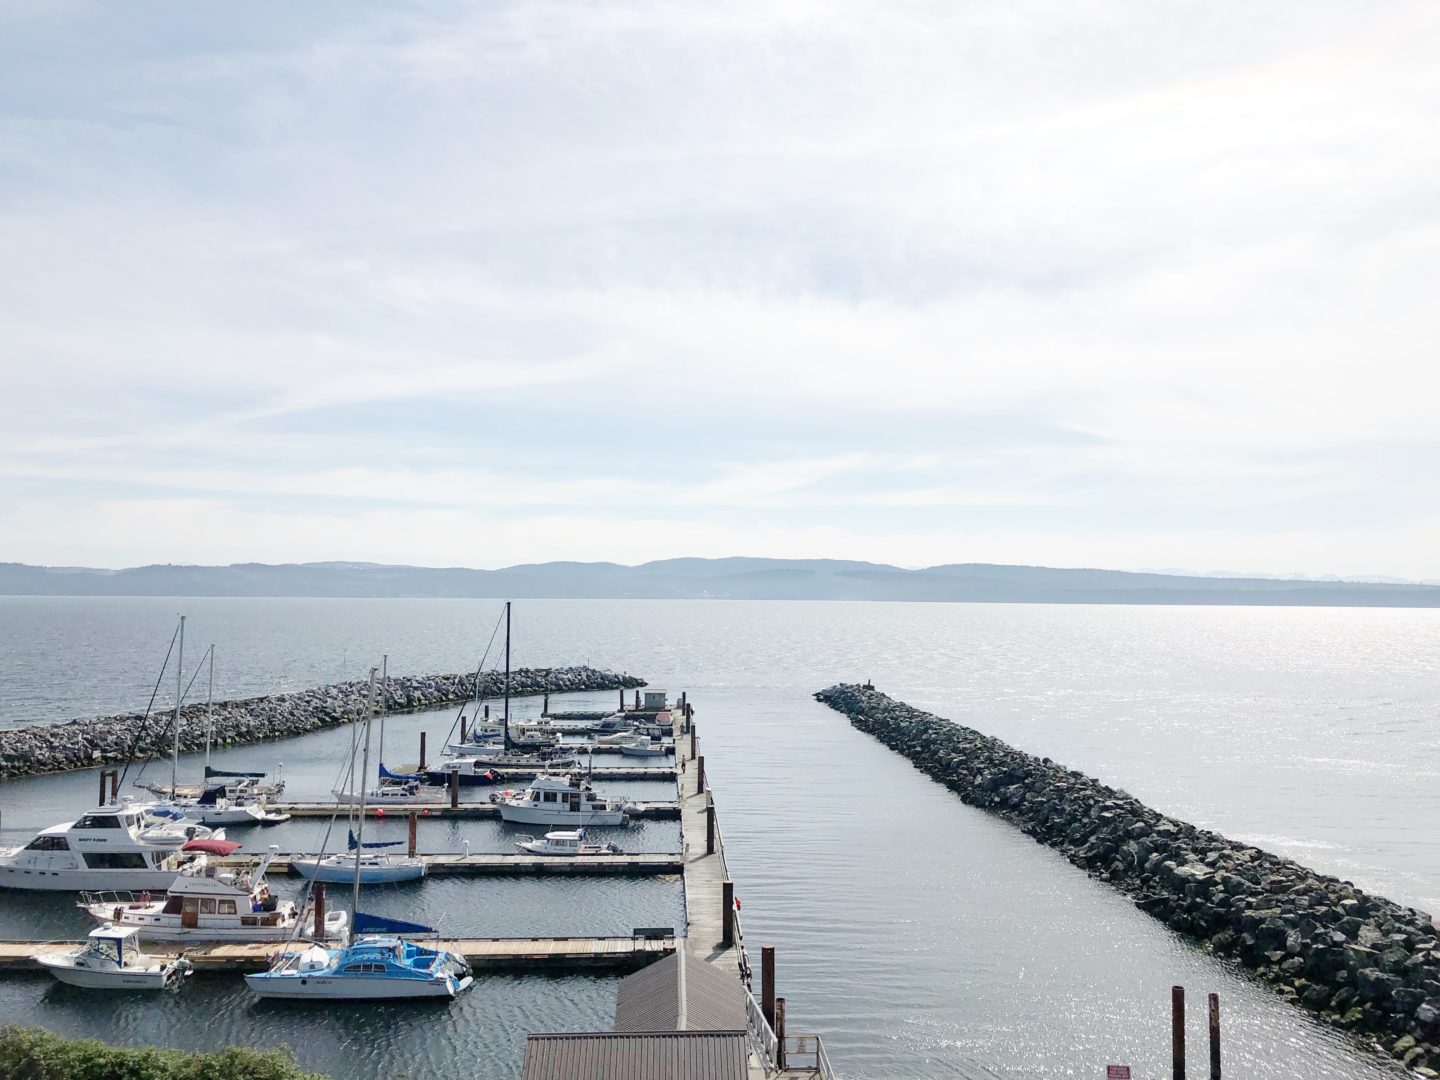 Where to eat and stay in powell river | bethalylovebeauty.com | Places to eat in powell river | Things to do in Powell River | Hotels in Powell River | Travel Powell River, BC | Family things to do in Powell River | A Day in Powell River